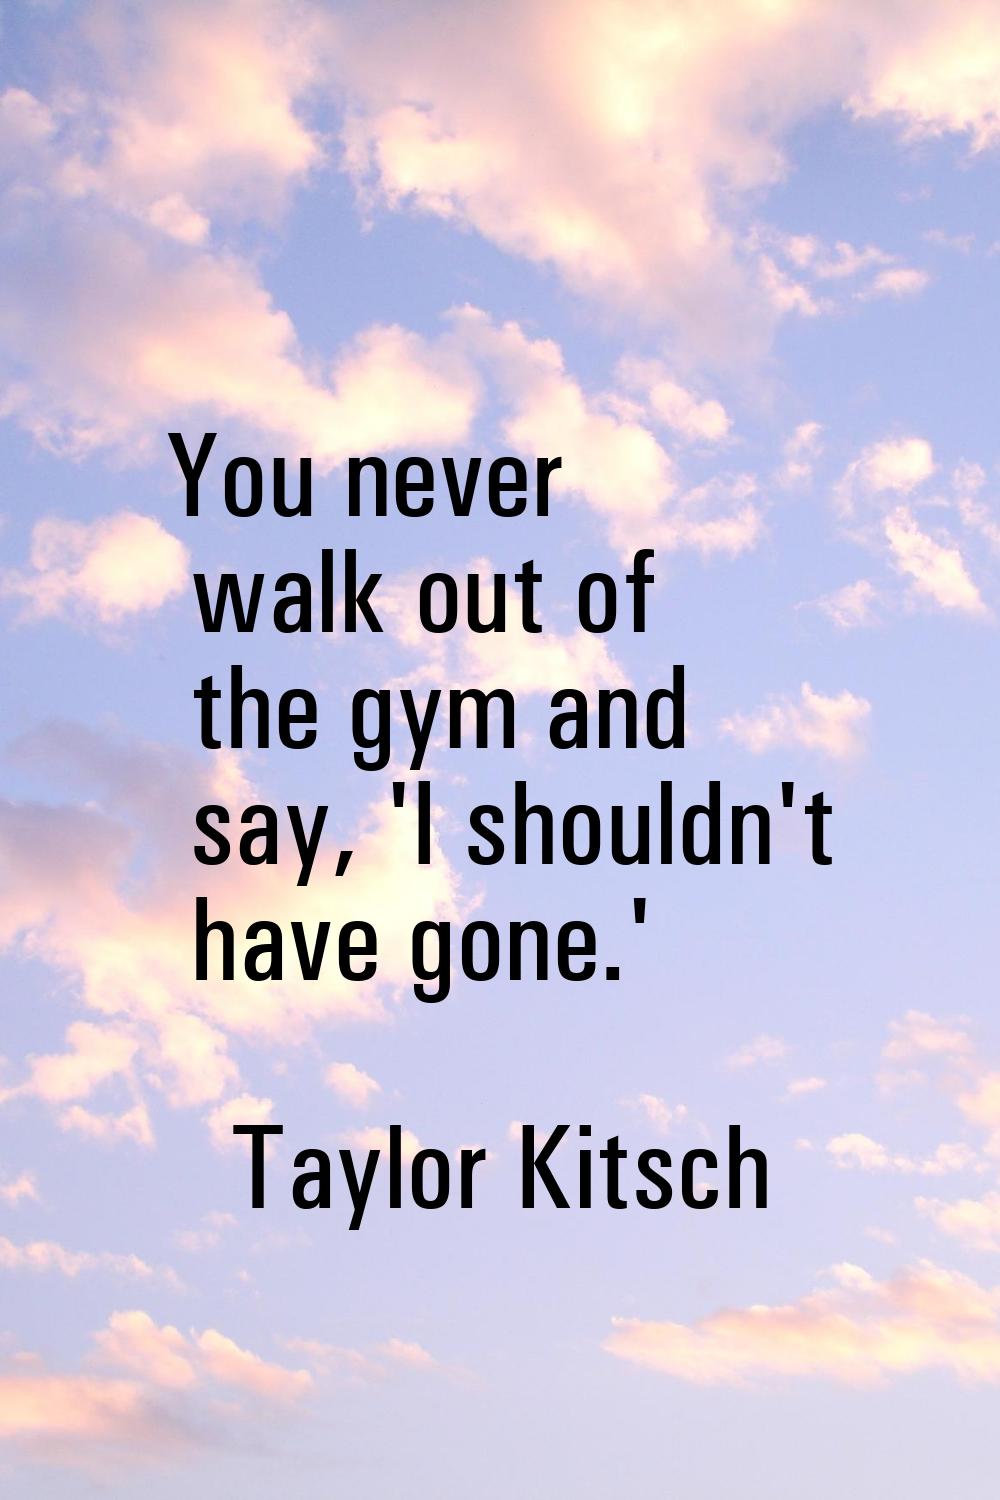 You never walk out of the gym and say, 'I shouldn't have gone.'